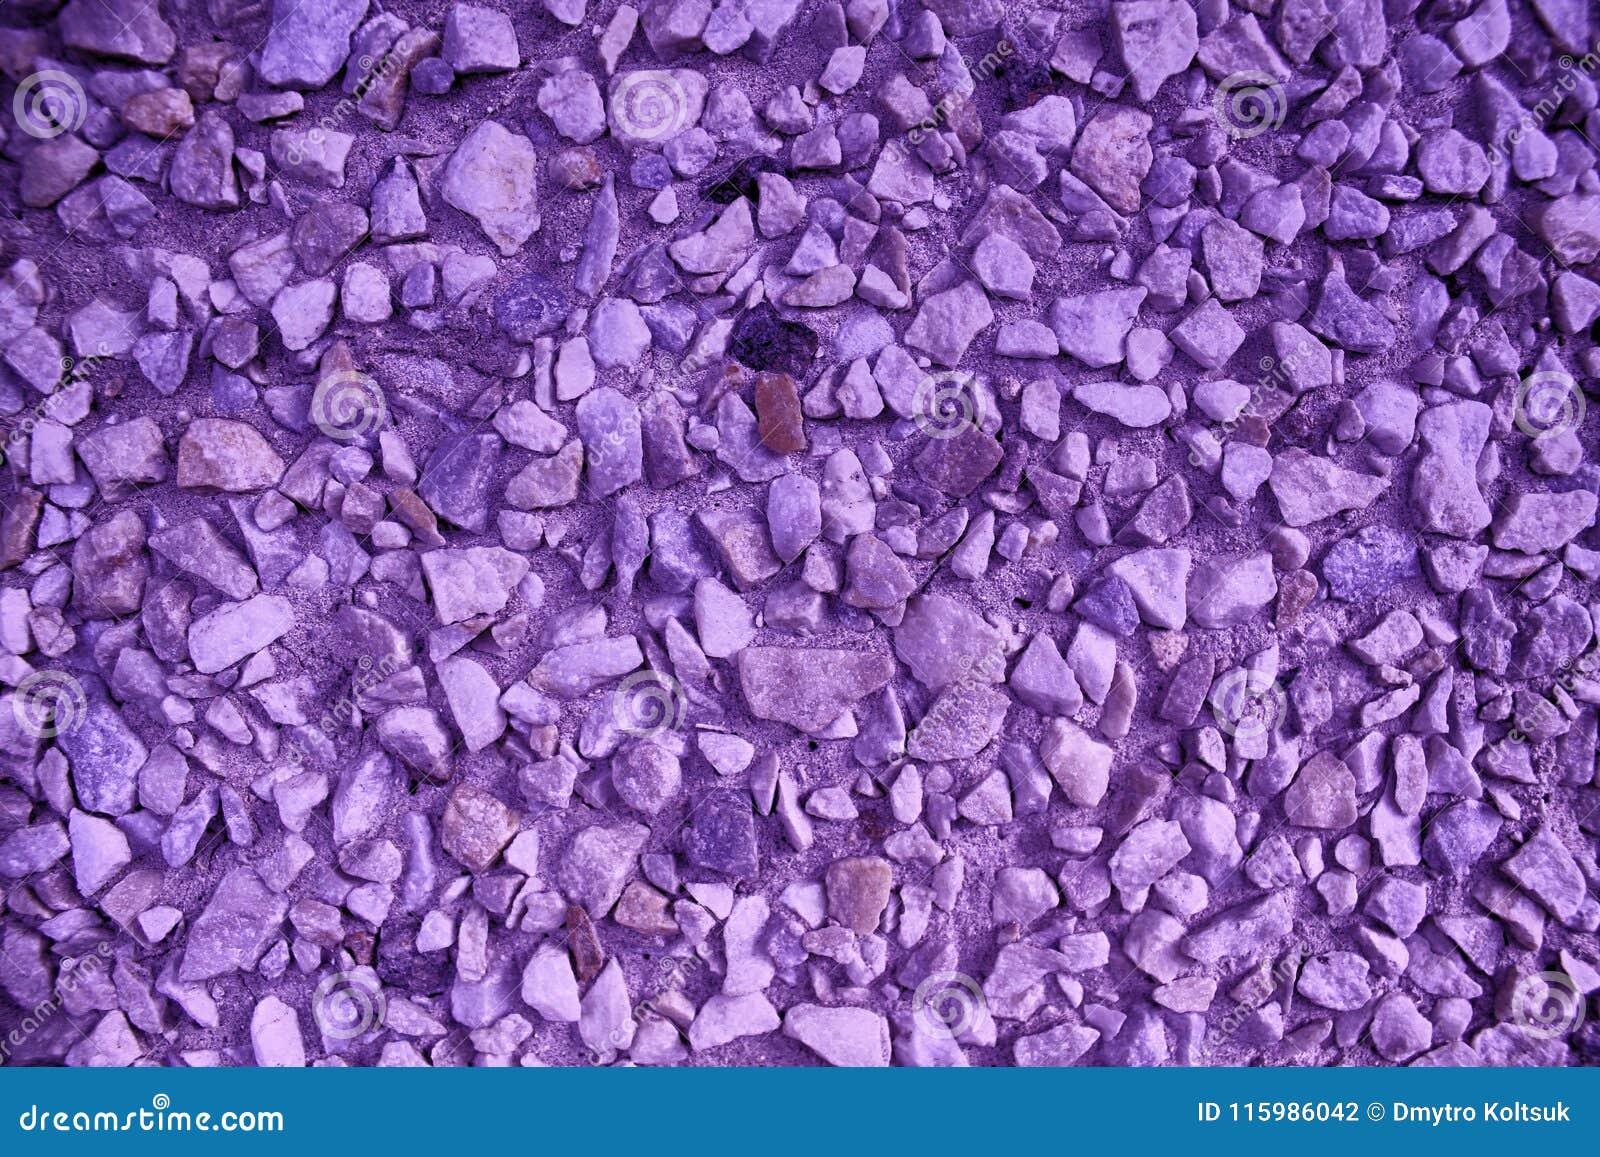 Ultra Purple Pebble Textured Surface Stone Backdrop And Boulder Background Stock Photo Image Of Pebbles Design 115986042